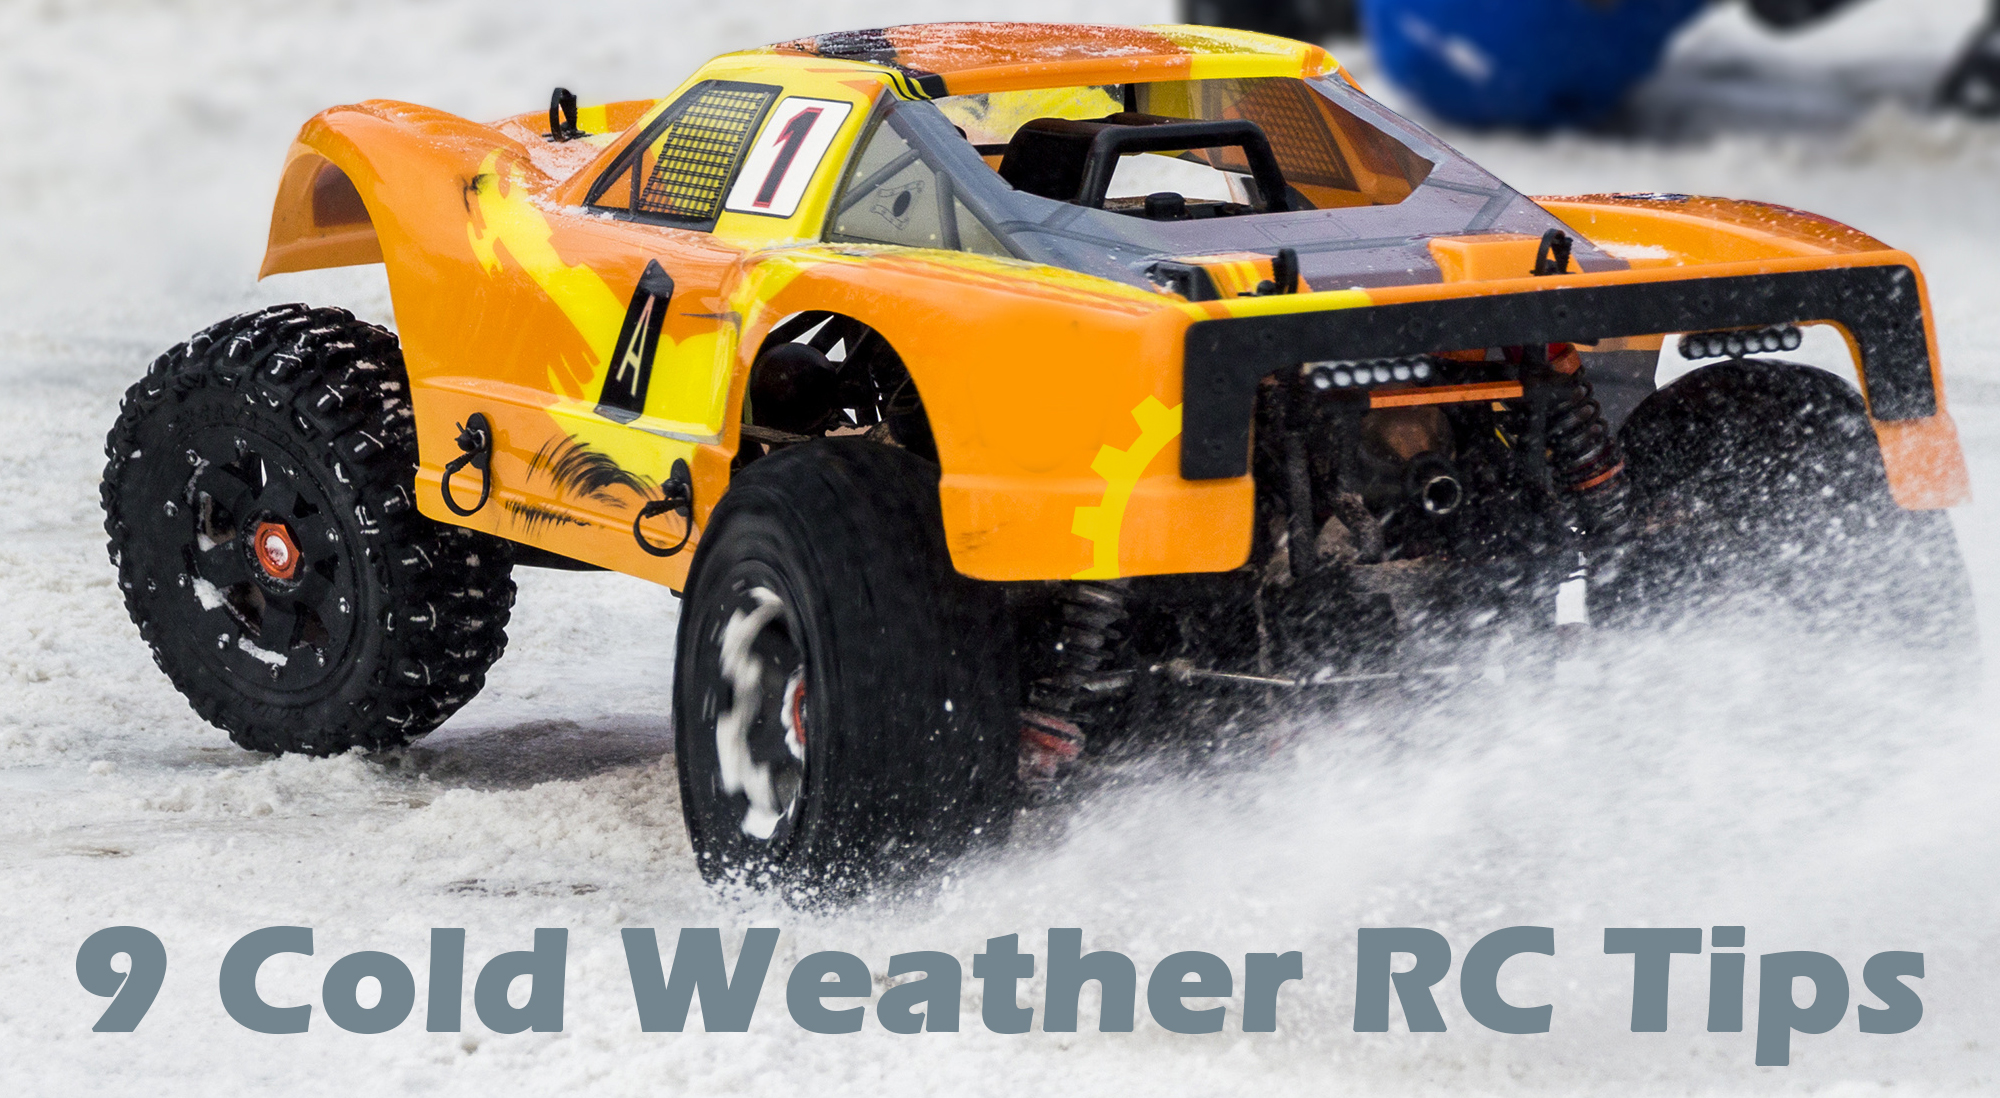 Cold Weather RC Tips